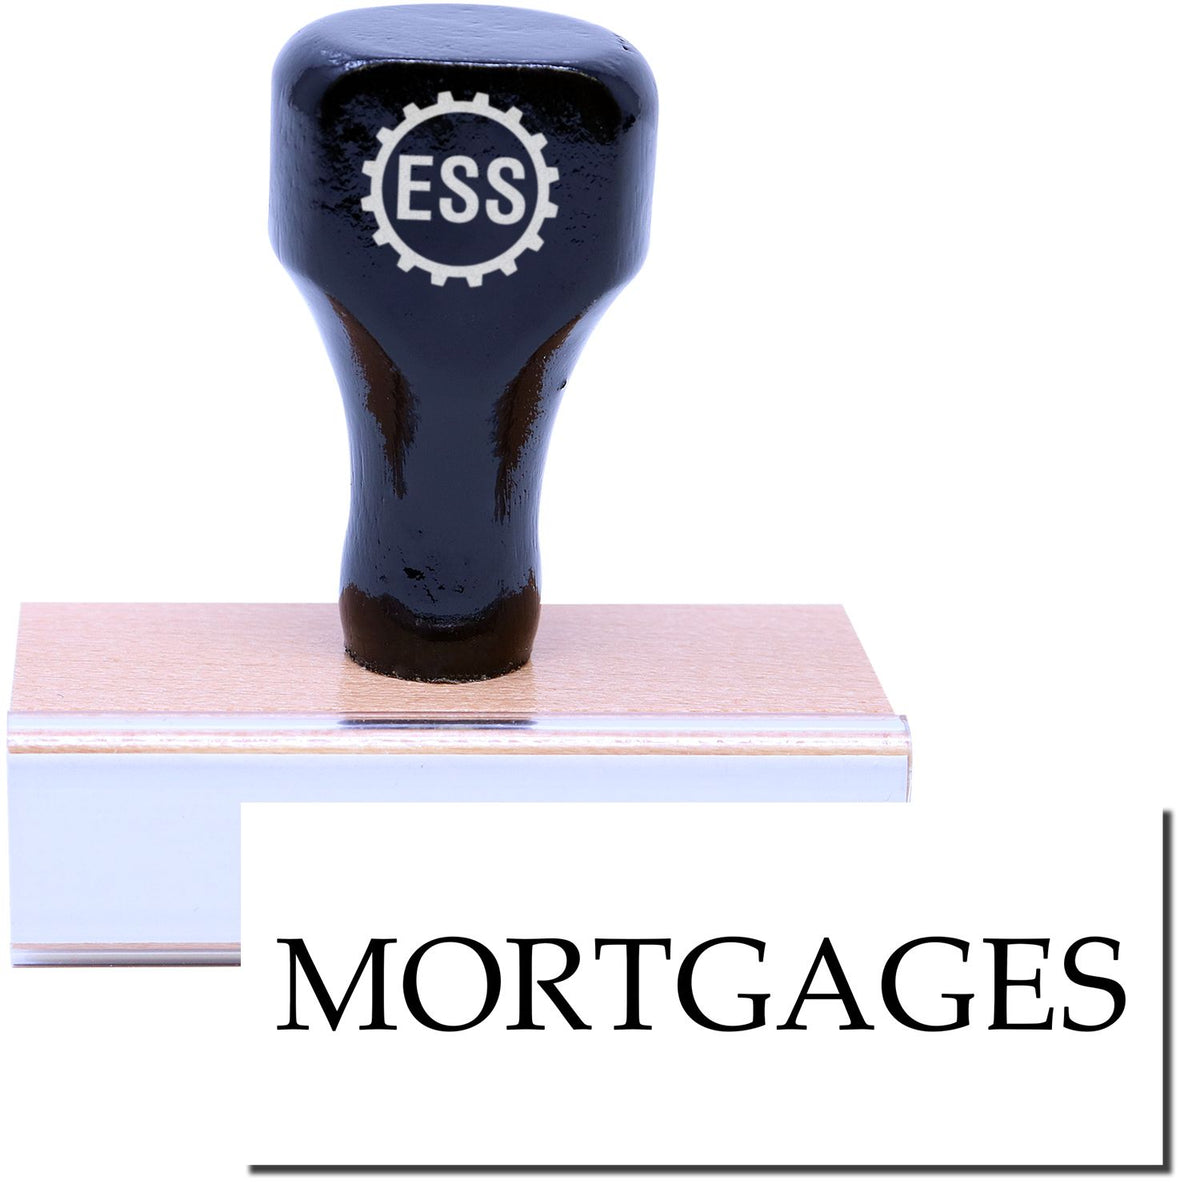 A stock office rubber stamp with a stamped image showing how the text &quot;MORTGAGES&quot; is displayed after stamping.